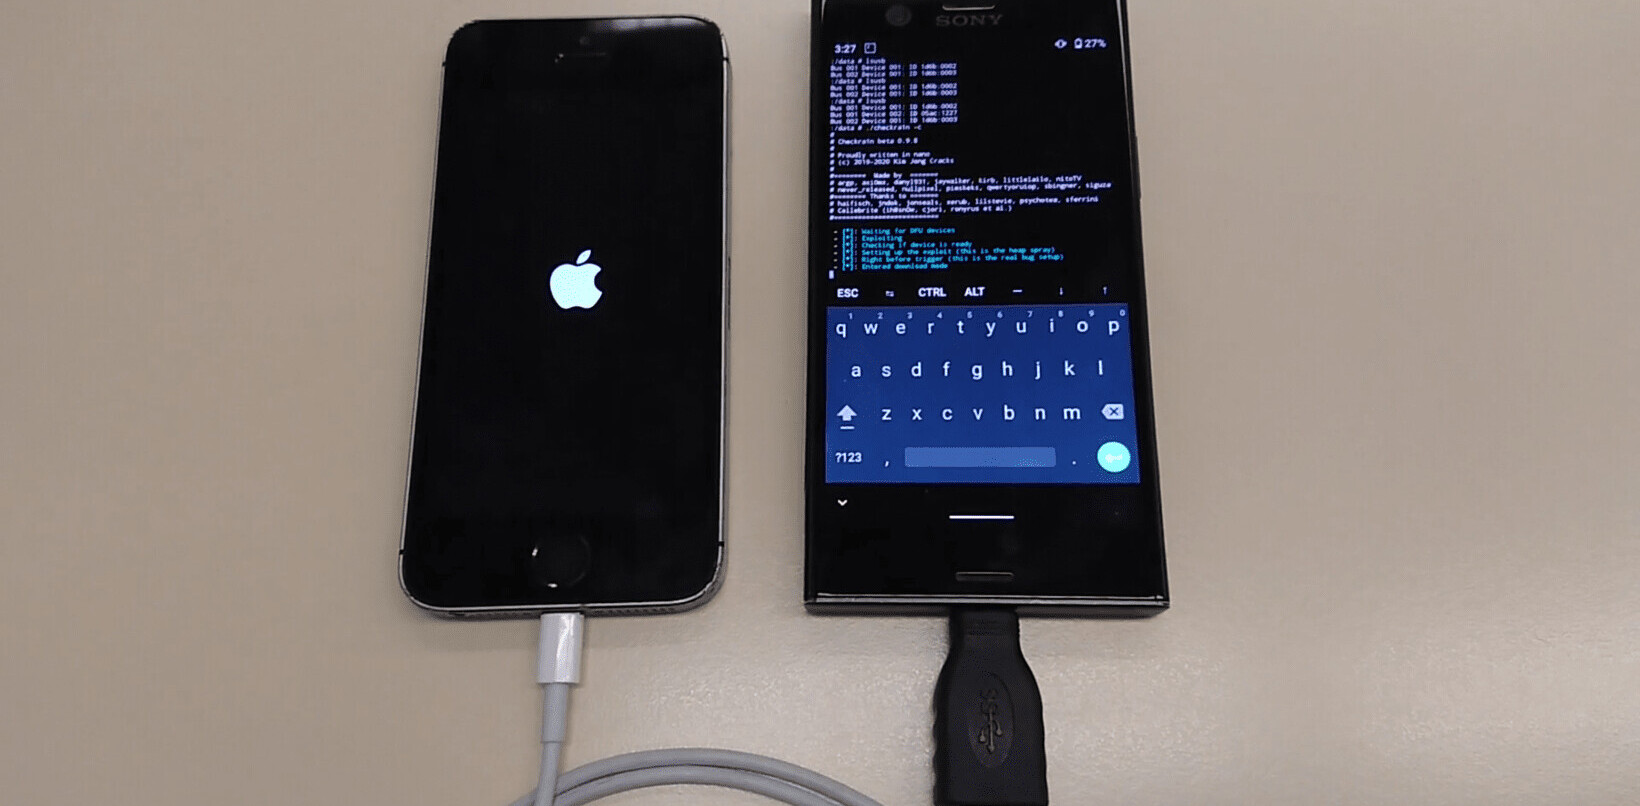 You can now jailbreak the iPhone… with a rooted Android phone